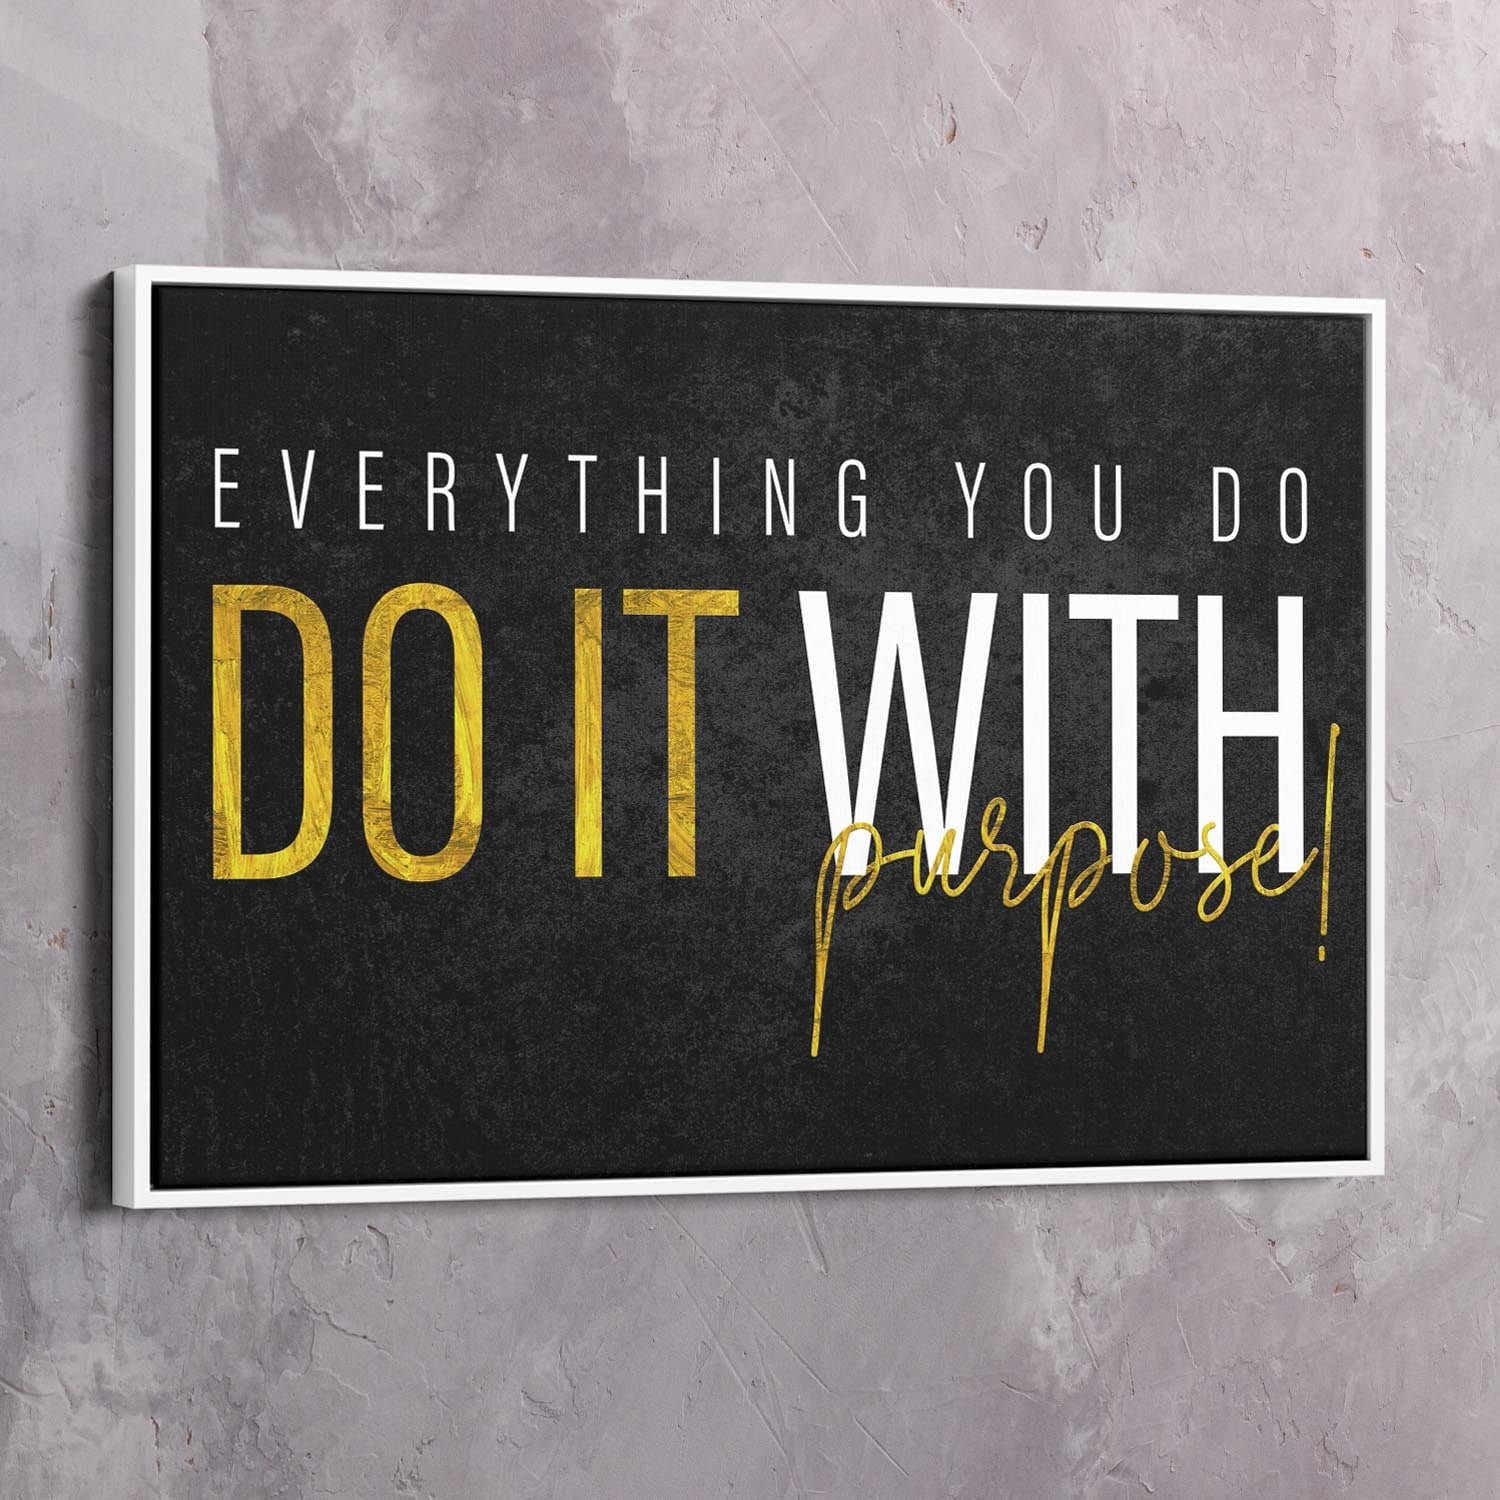 Do it with Purpose Wall Art | Inspirational Wall Art Motivational Wall Art Quotes Office Art | ImpaktMaker Exclusive Canvas Art Landscape